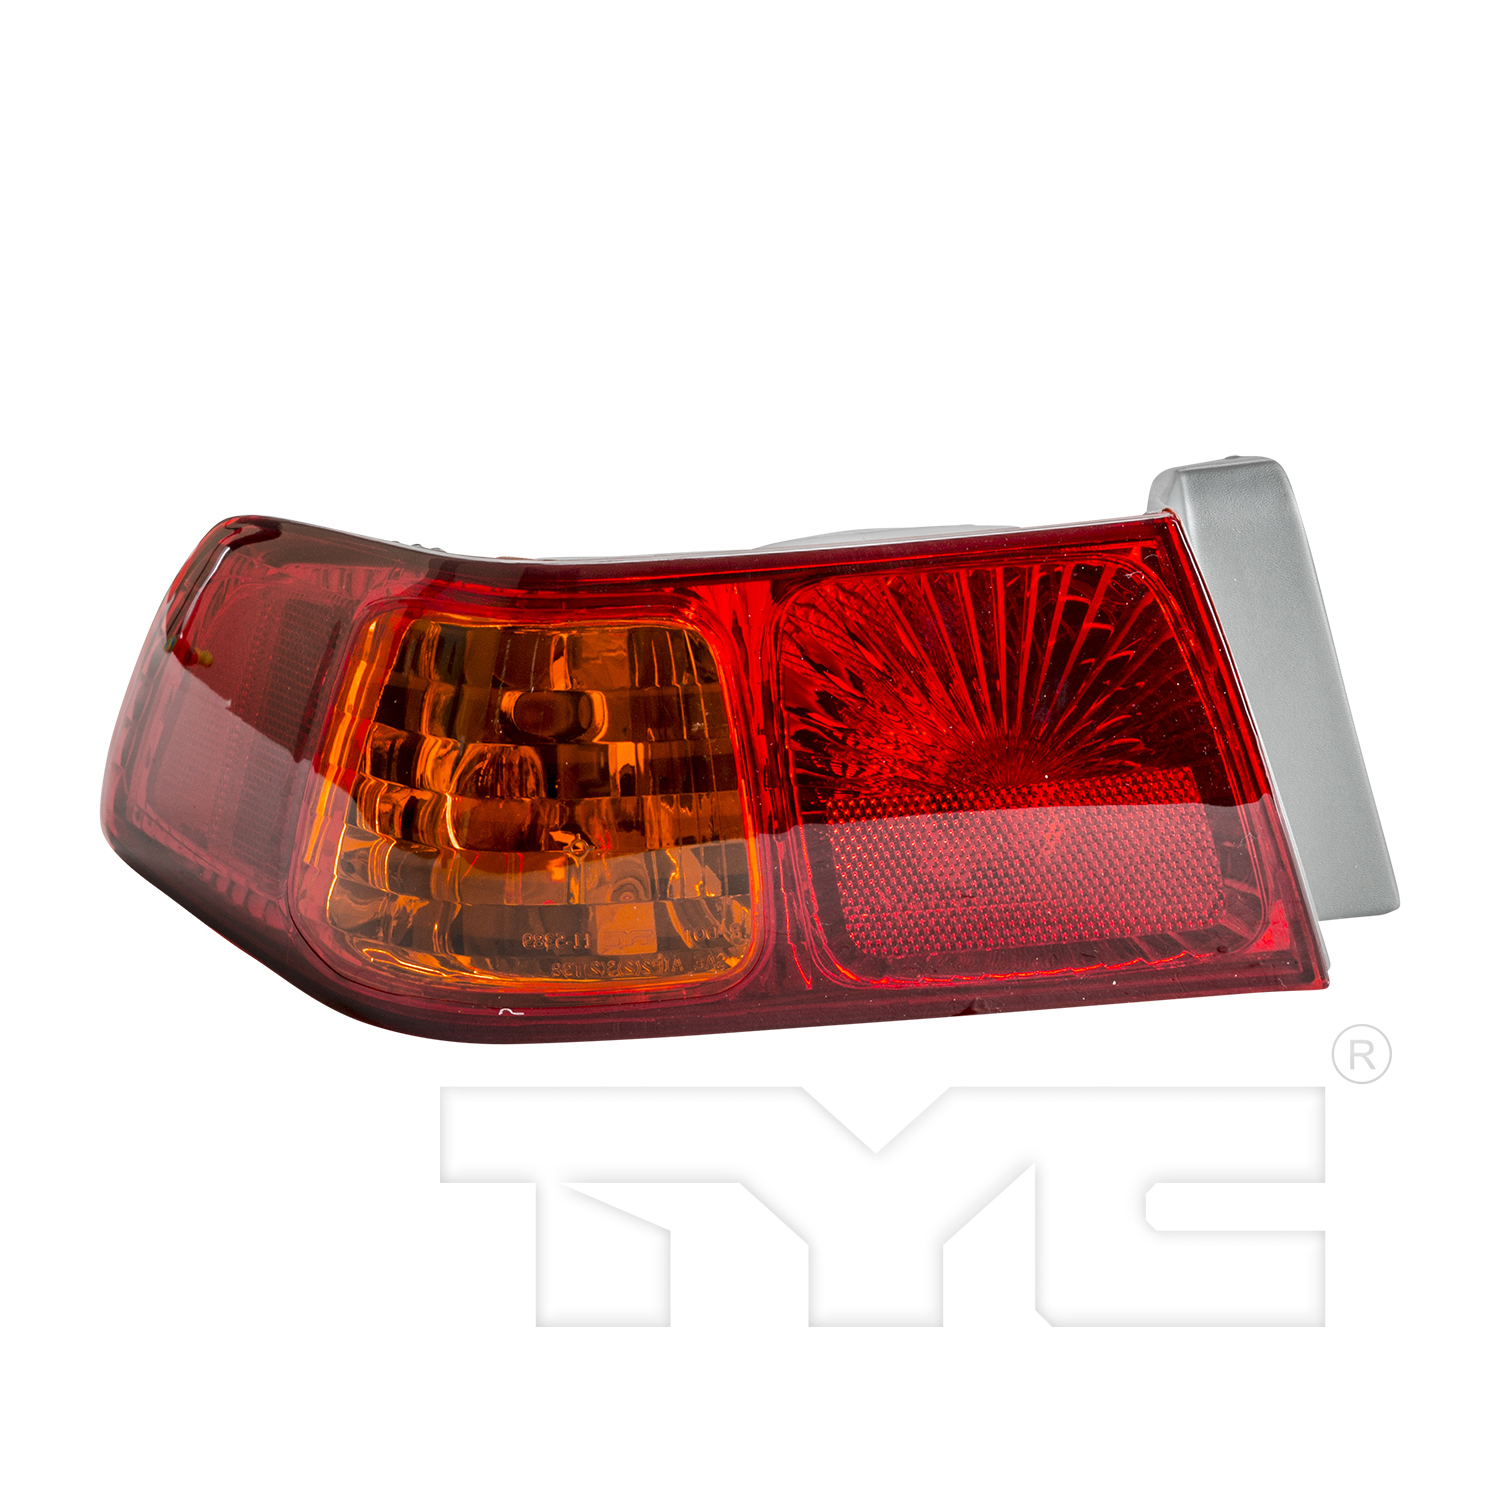 Aftermarket TAILLIGHTS for TOYOTA - CAMRY, CAMRY,00-01,LT Taillamp assy